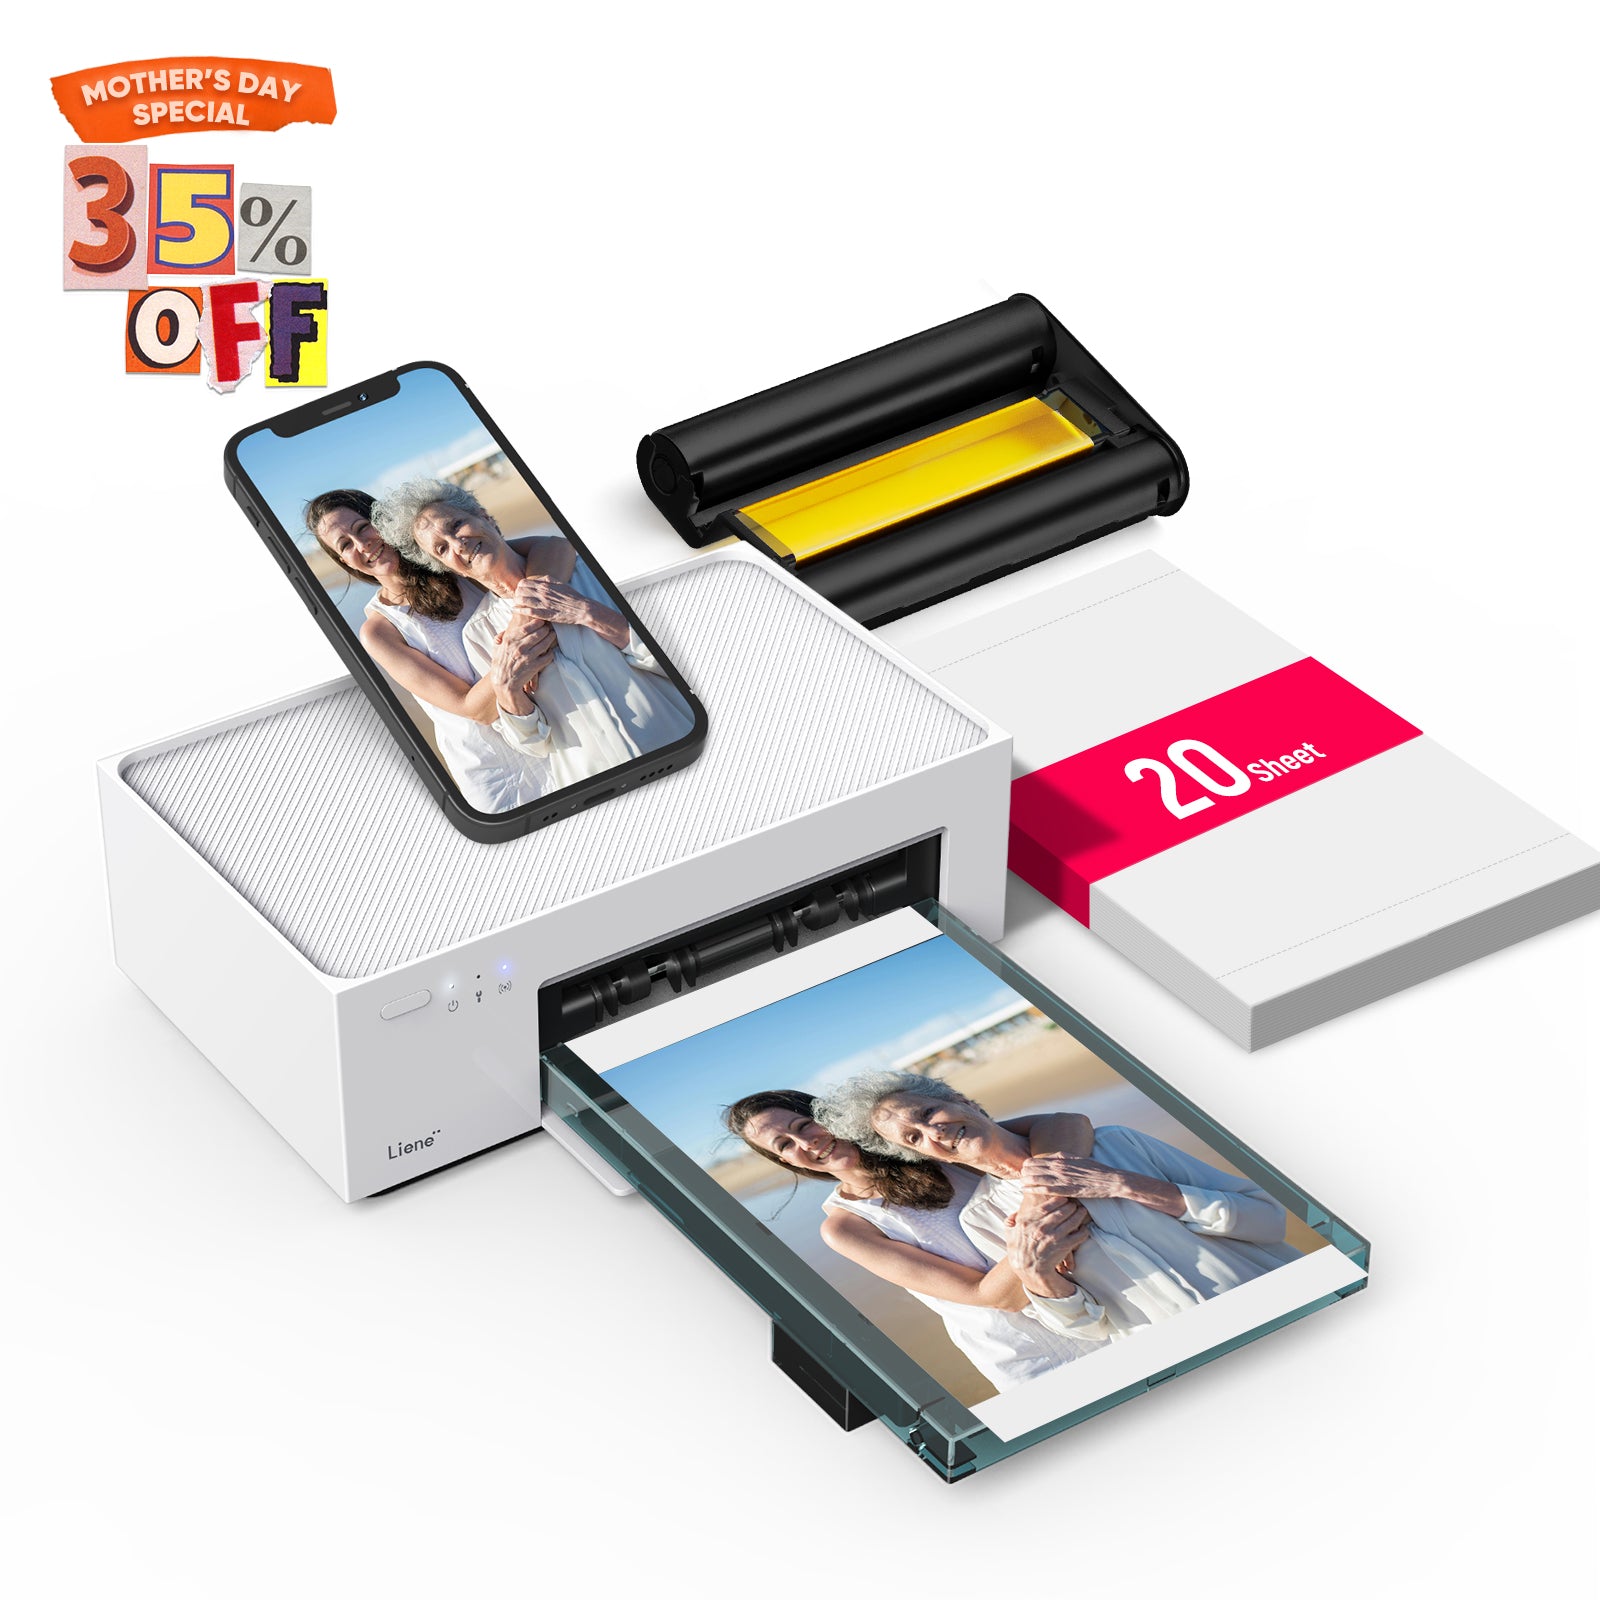 Liene Amber 4x6" Instant Photo Printer White (20 Photo Papers + 1 Cartridge)